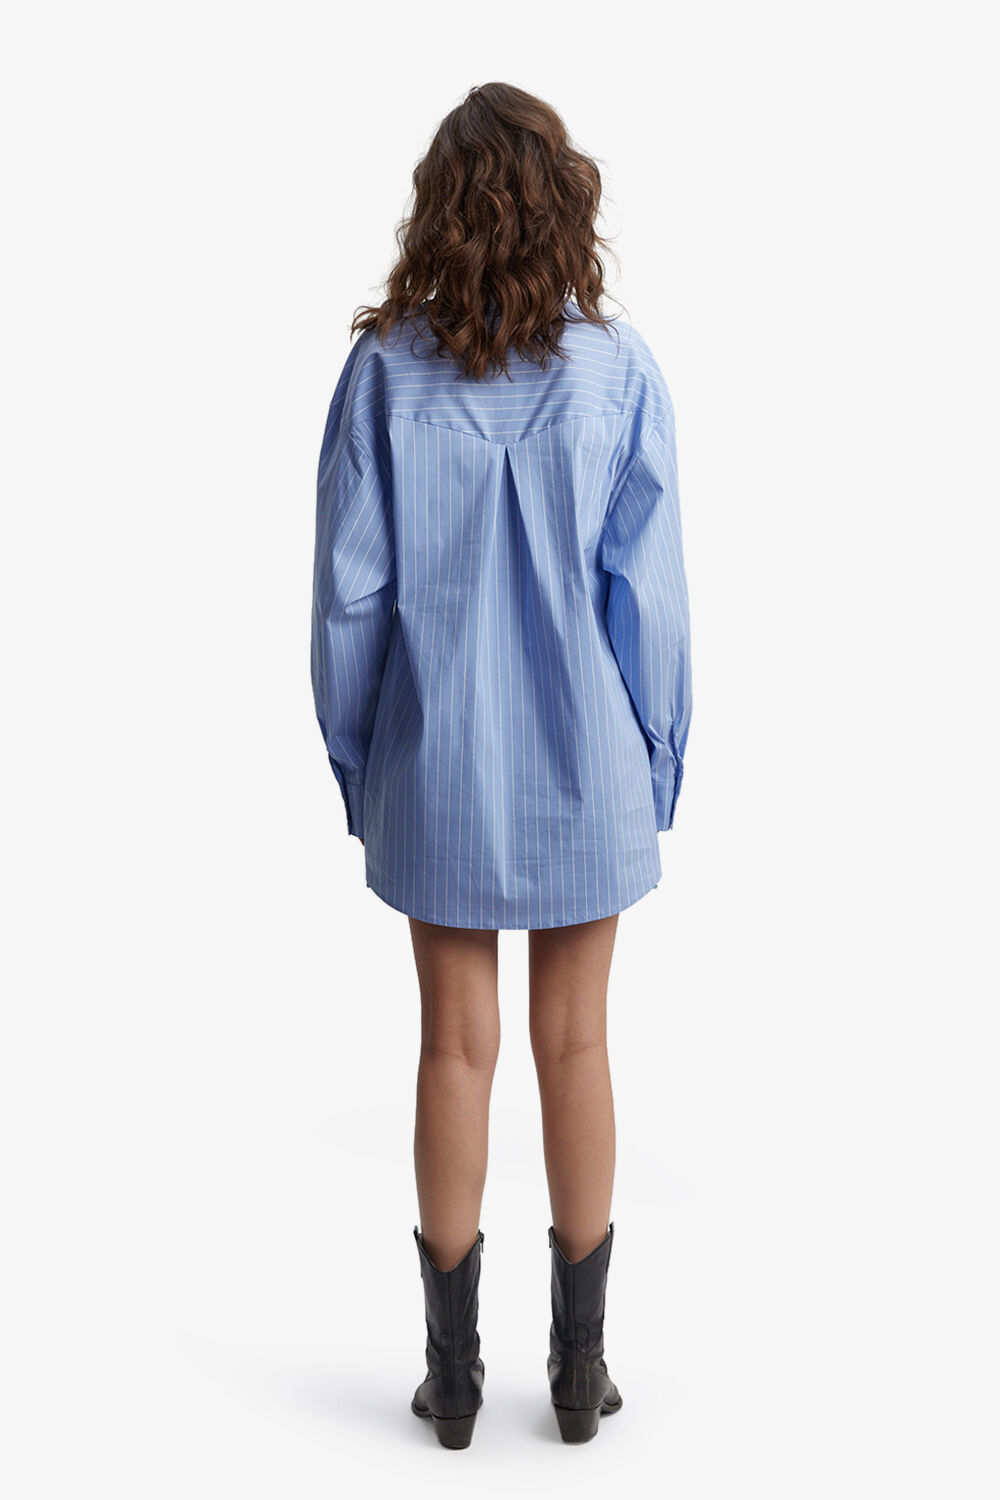 STRIPED OVERSIZED SHIRT in colour CLOUD DANCER